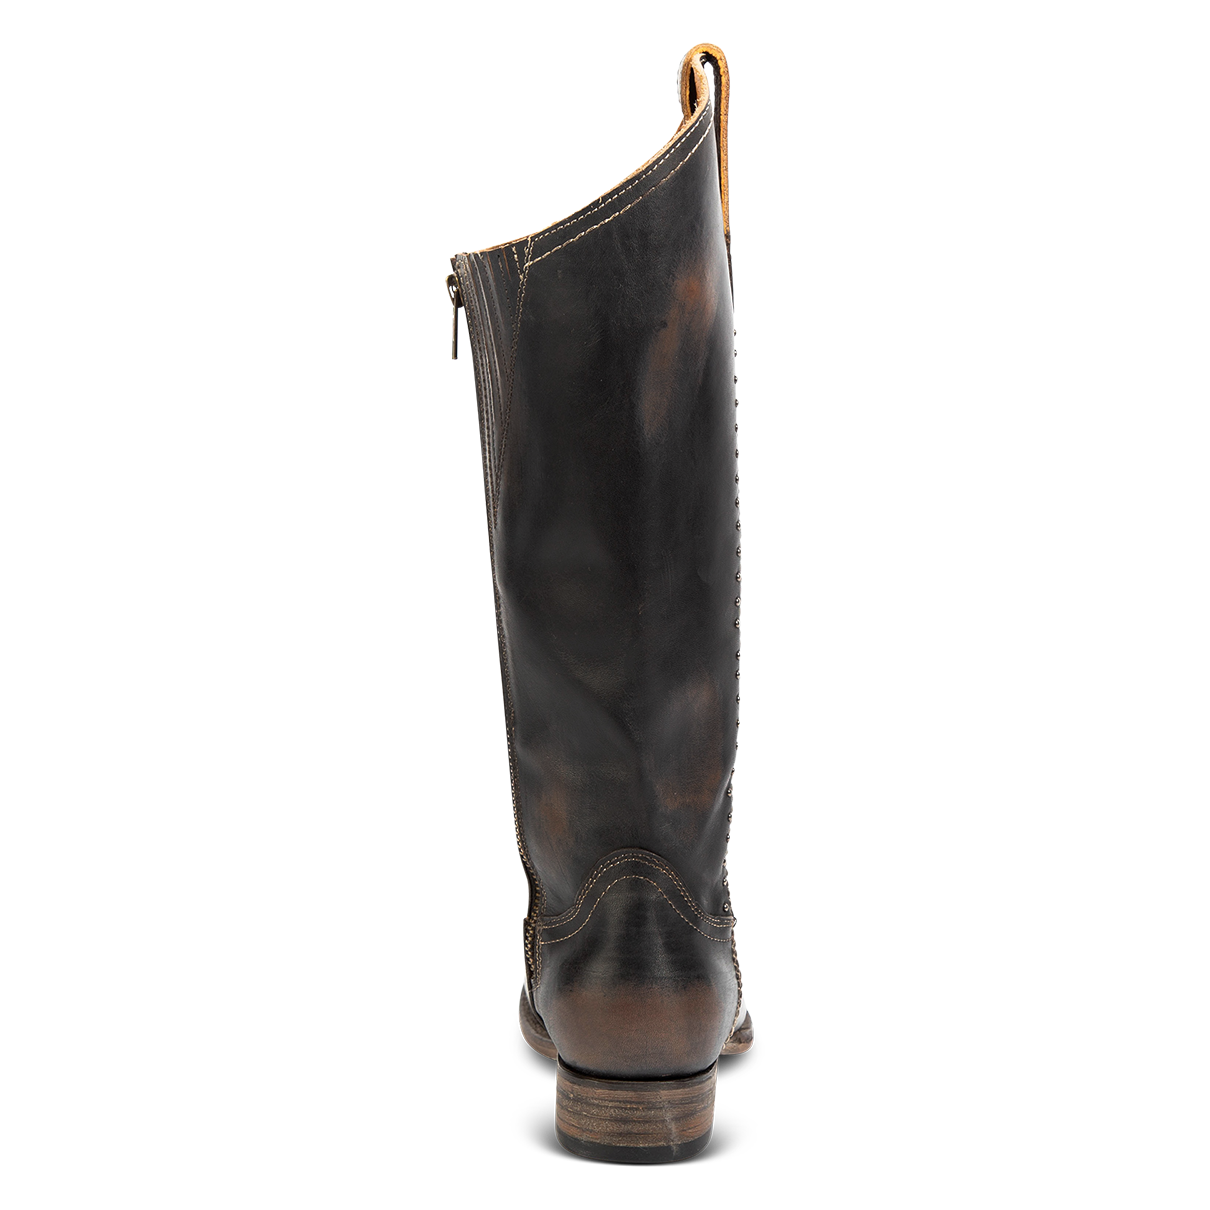 Back view showing low heel on FREEBIRD women's RIgger black leather boot